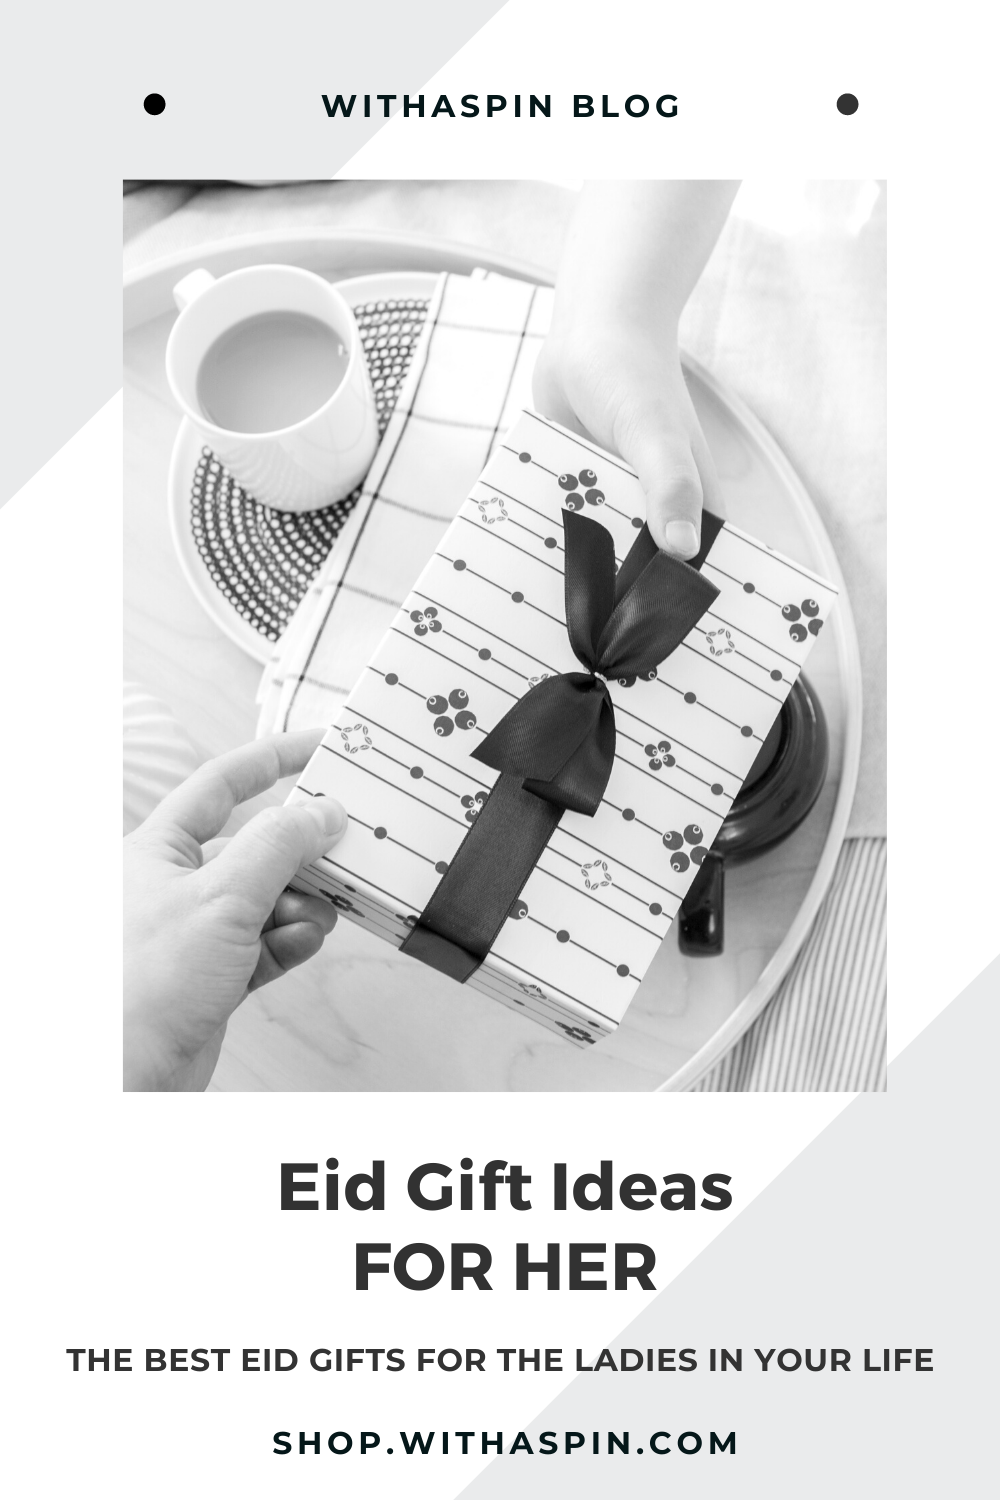 Eid gift ideas For Her